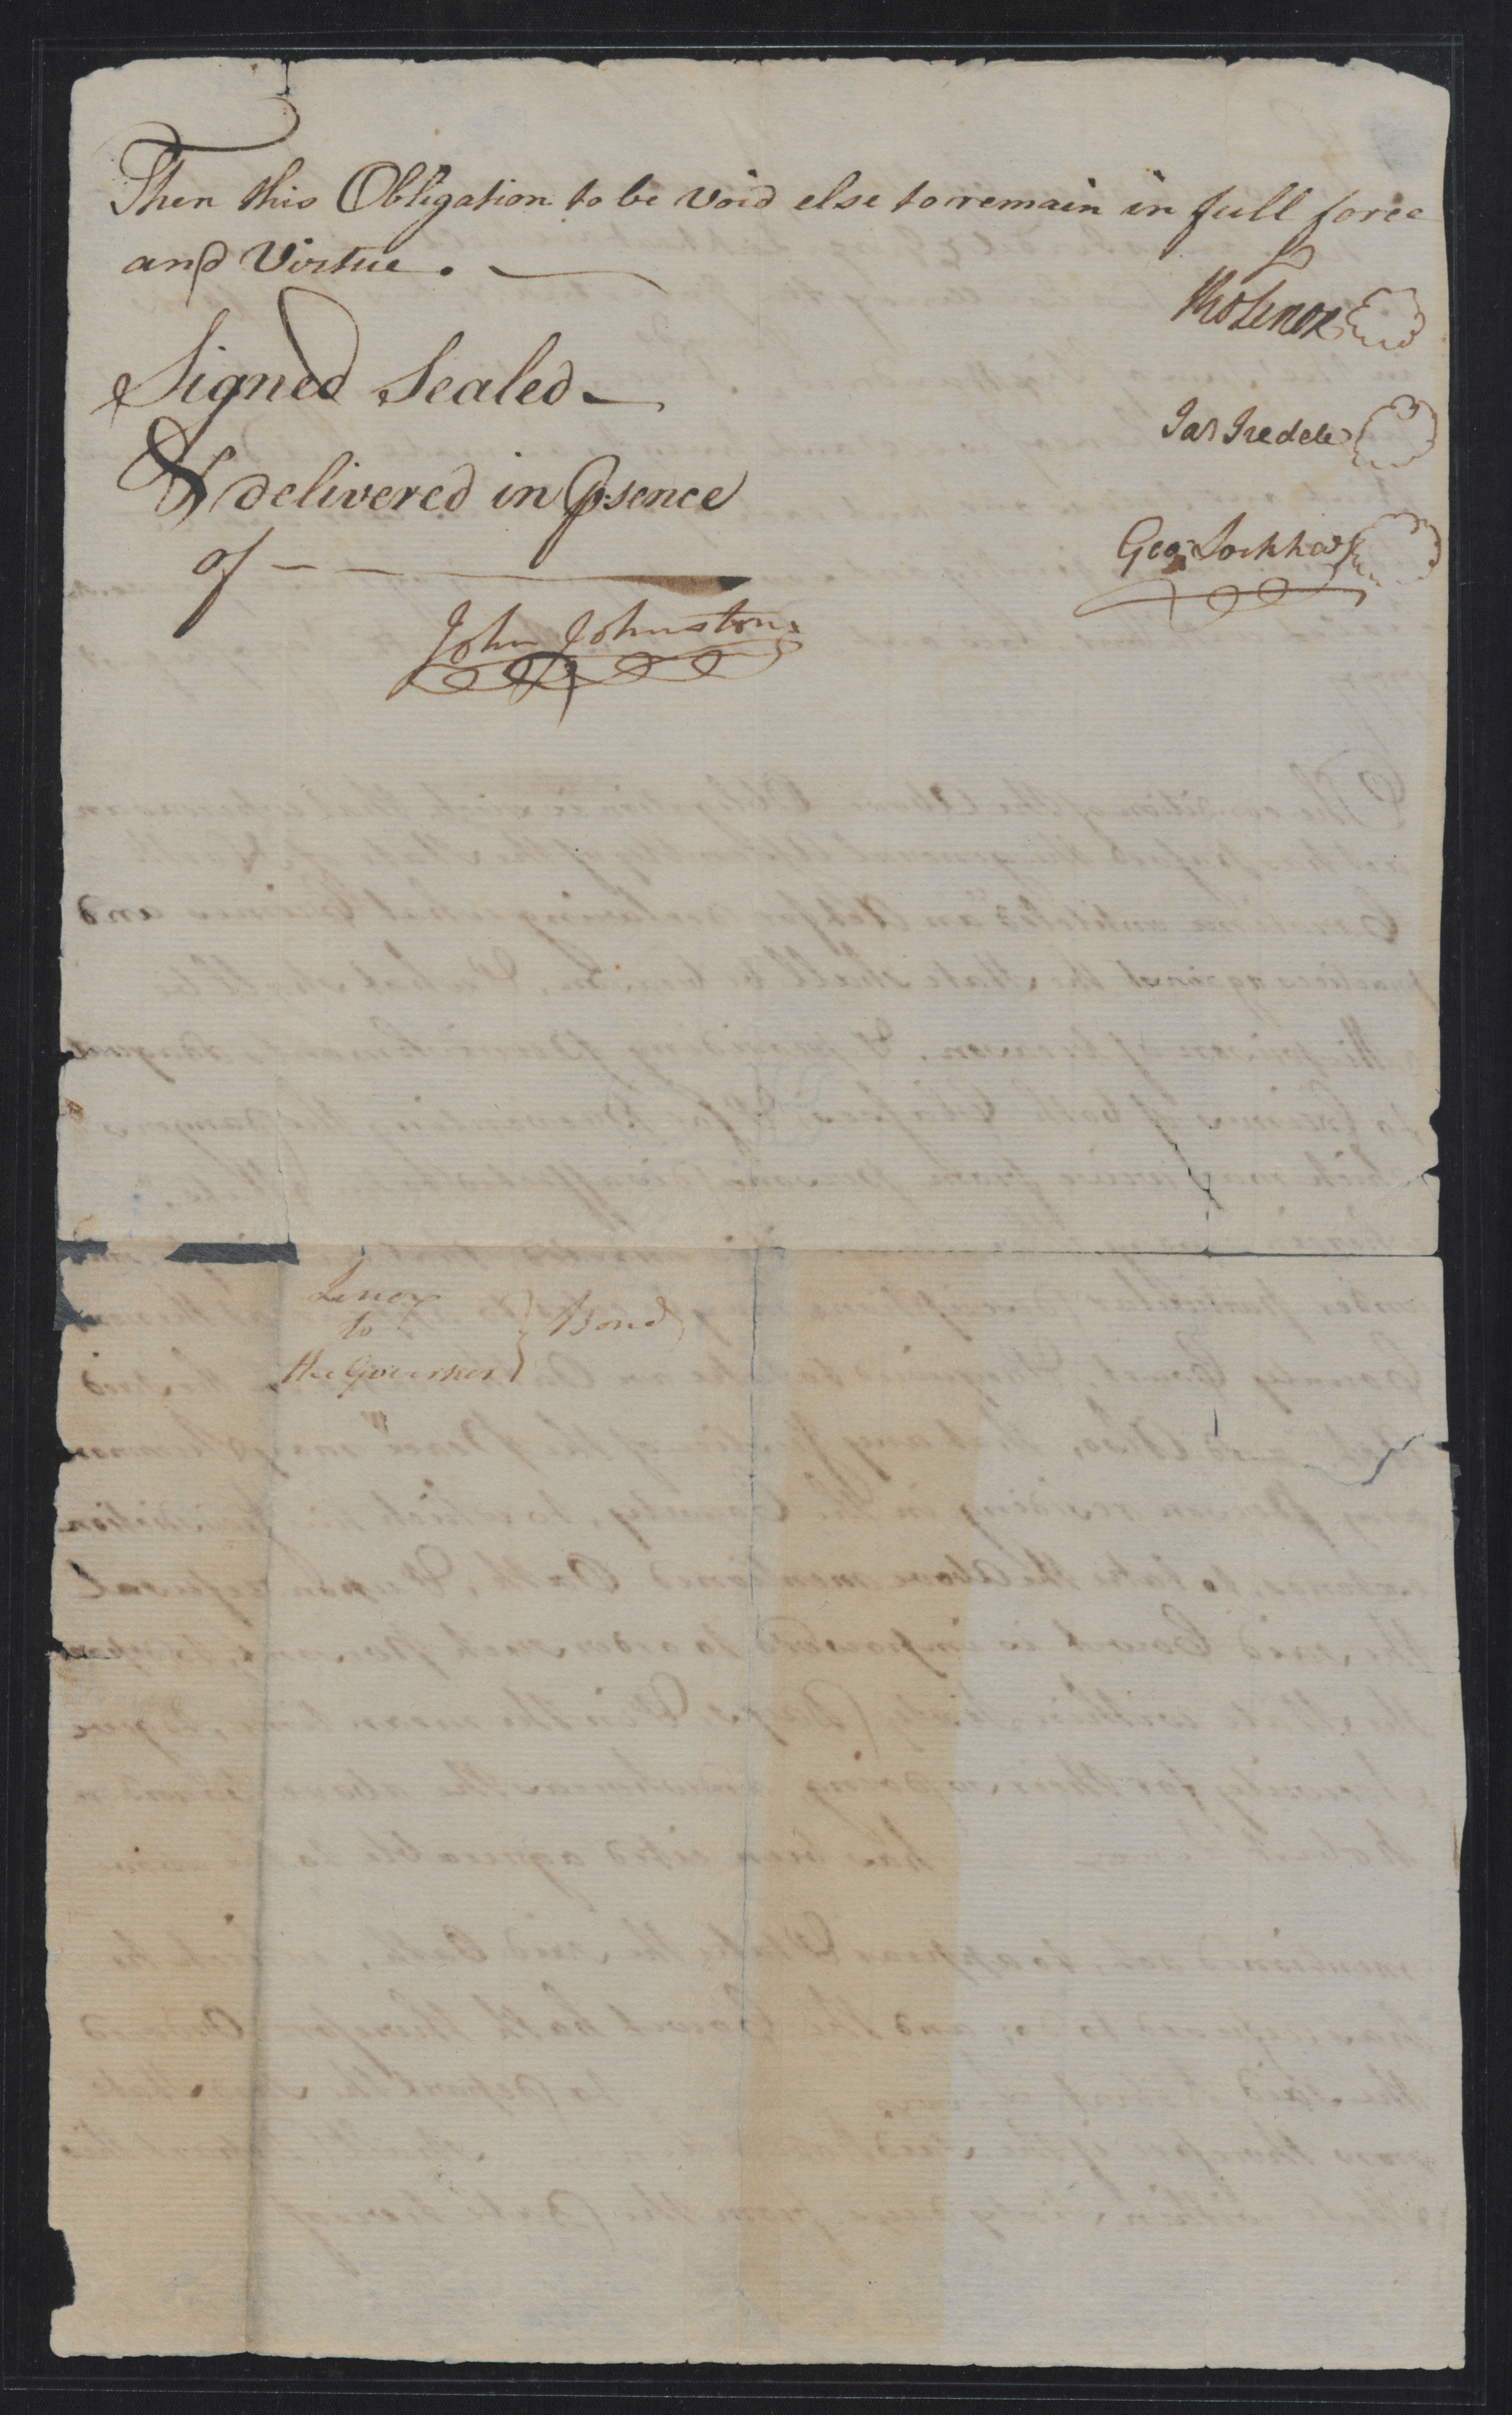 Bond from the Bertie County Court for Robert Lenox to leave North Carolina, 14 August 1777, page 2